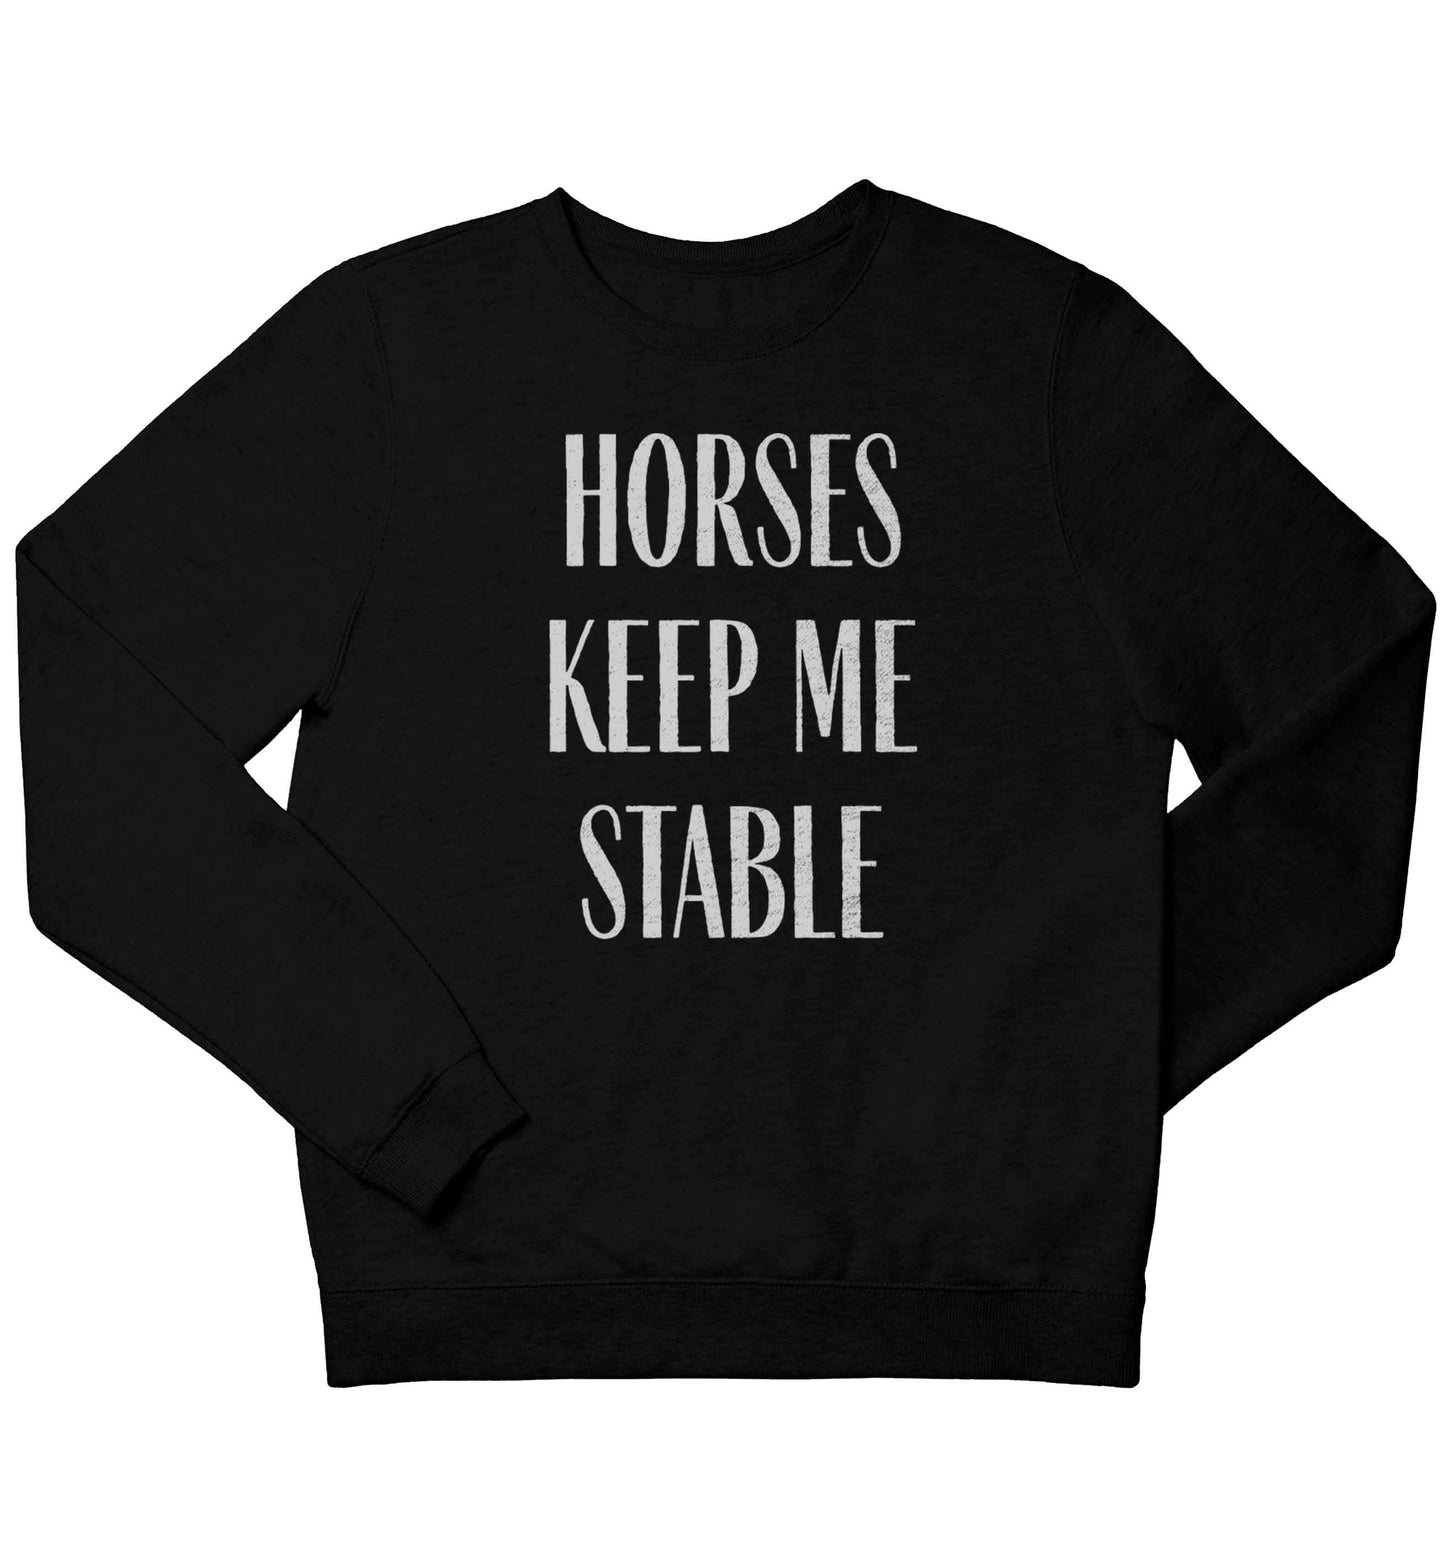 Horses keep me stable children's black sweater 12-13 Years